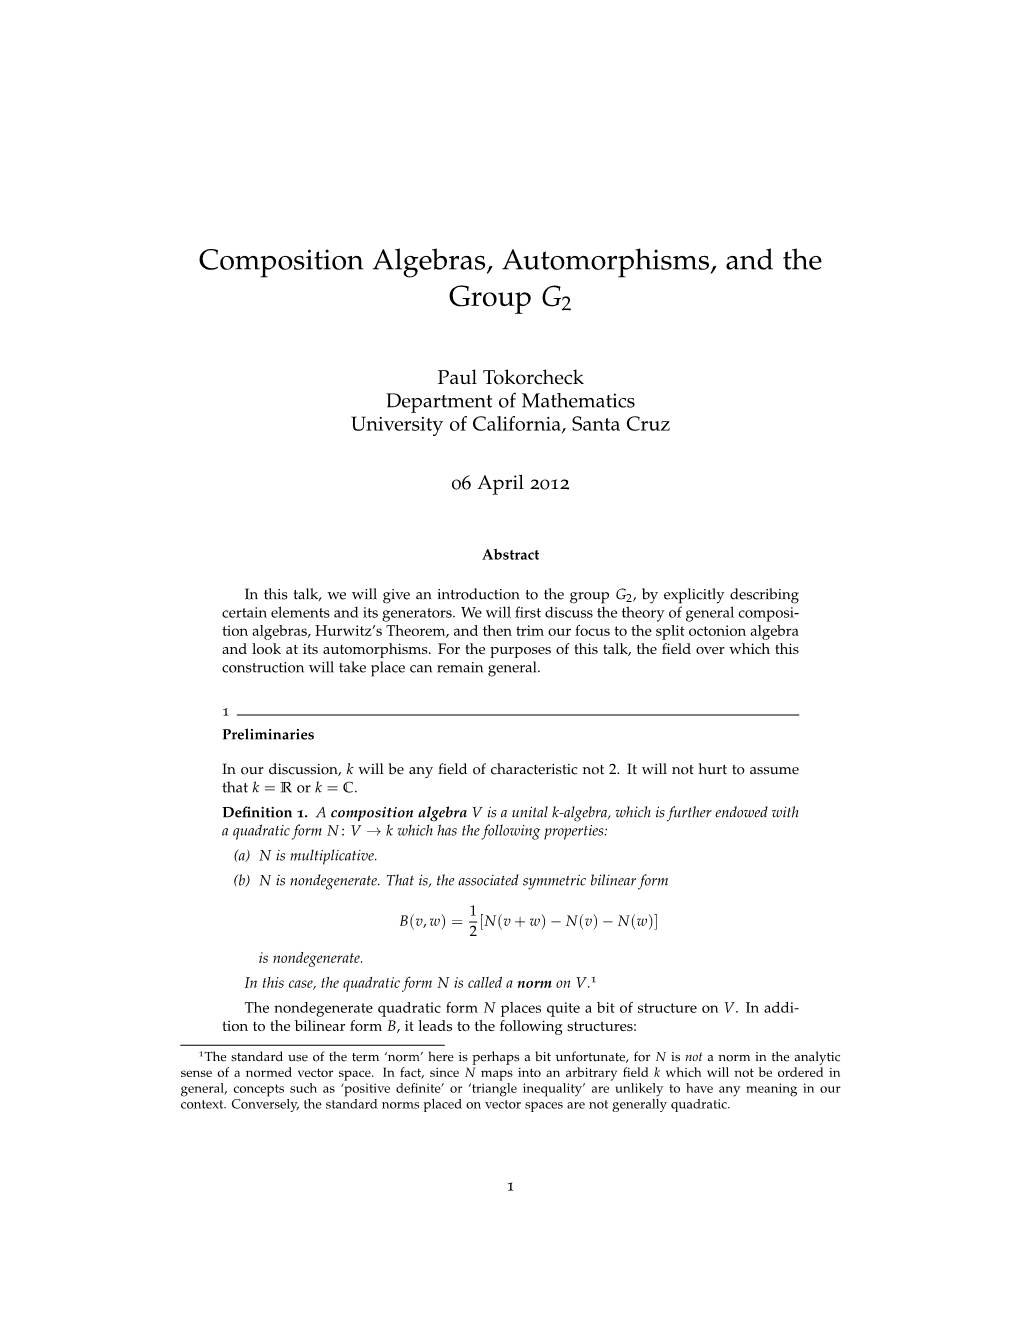 Composition Algebras, Automorphisms, and the Group G2